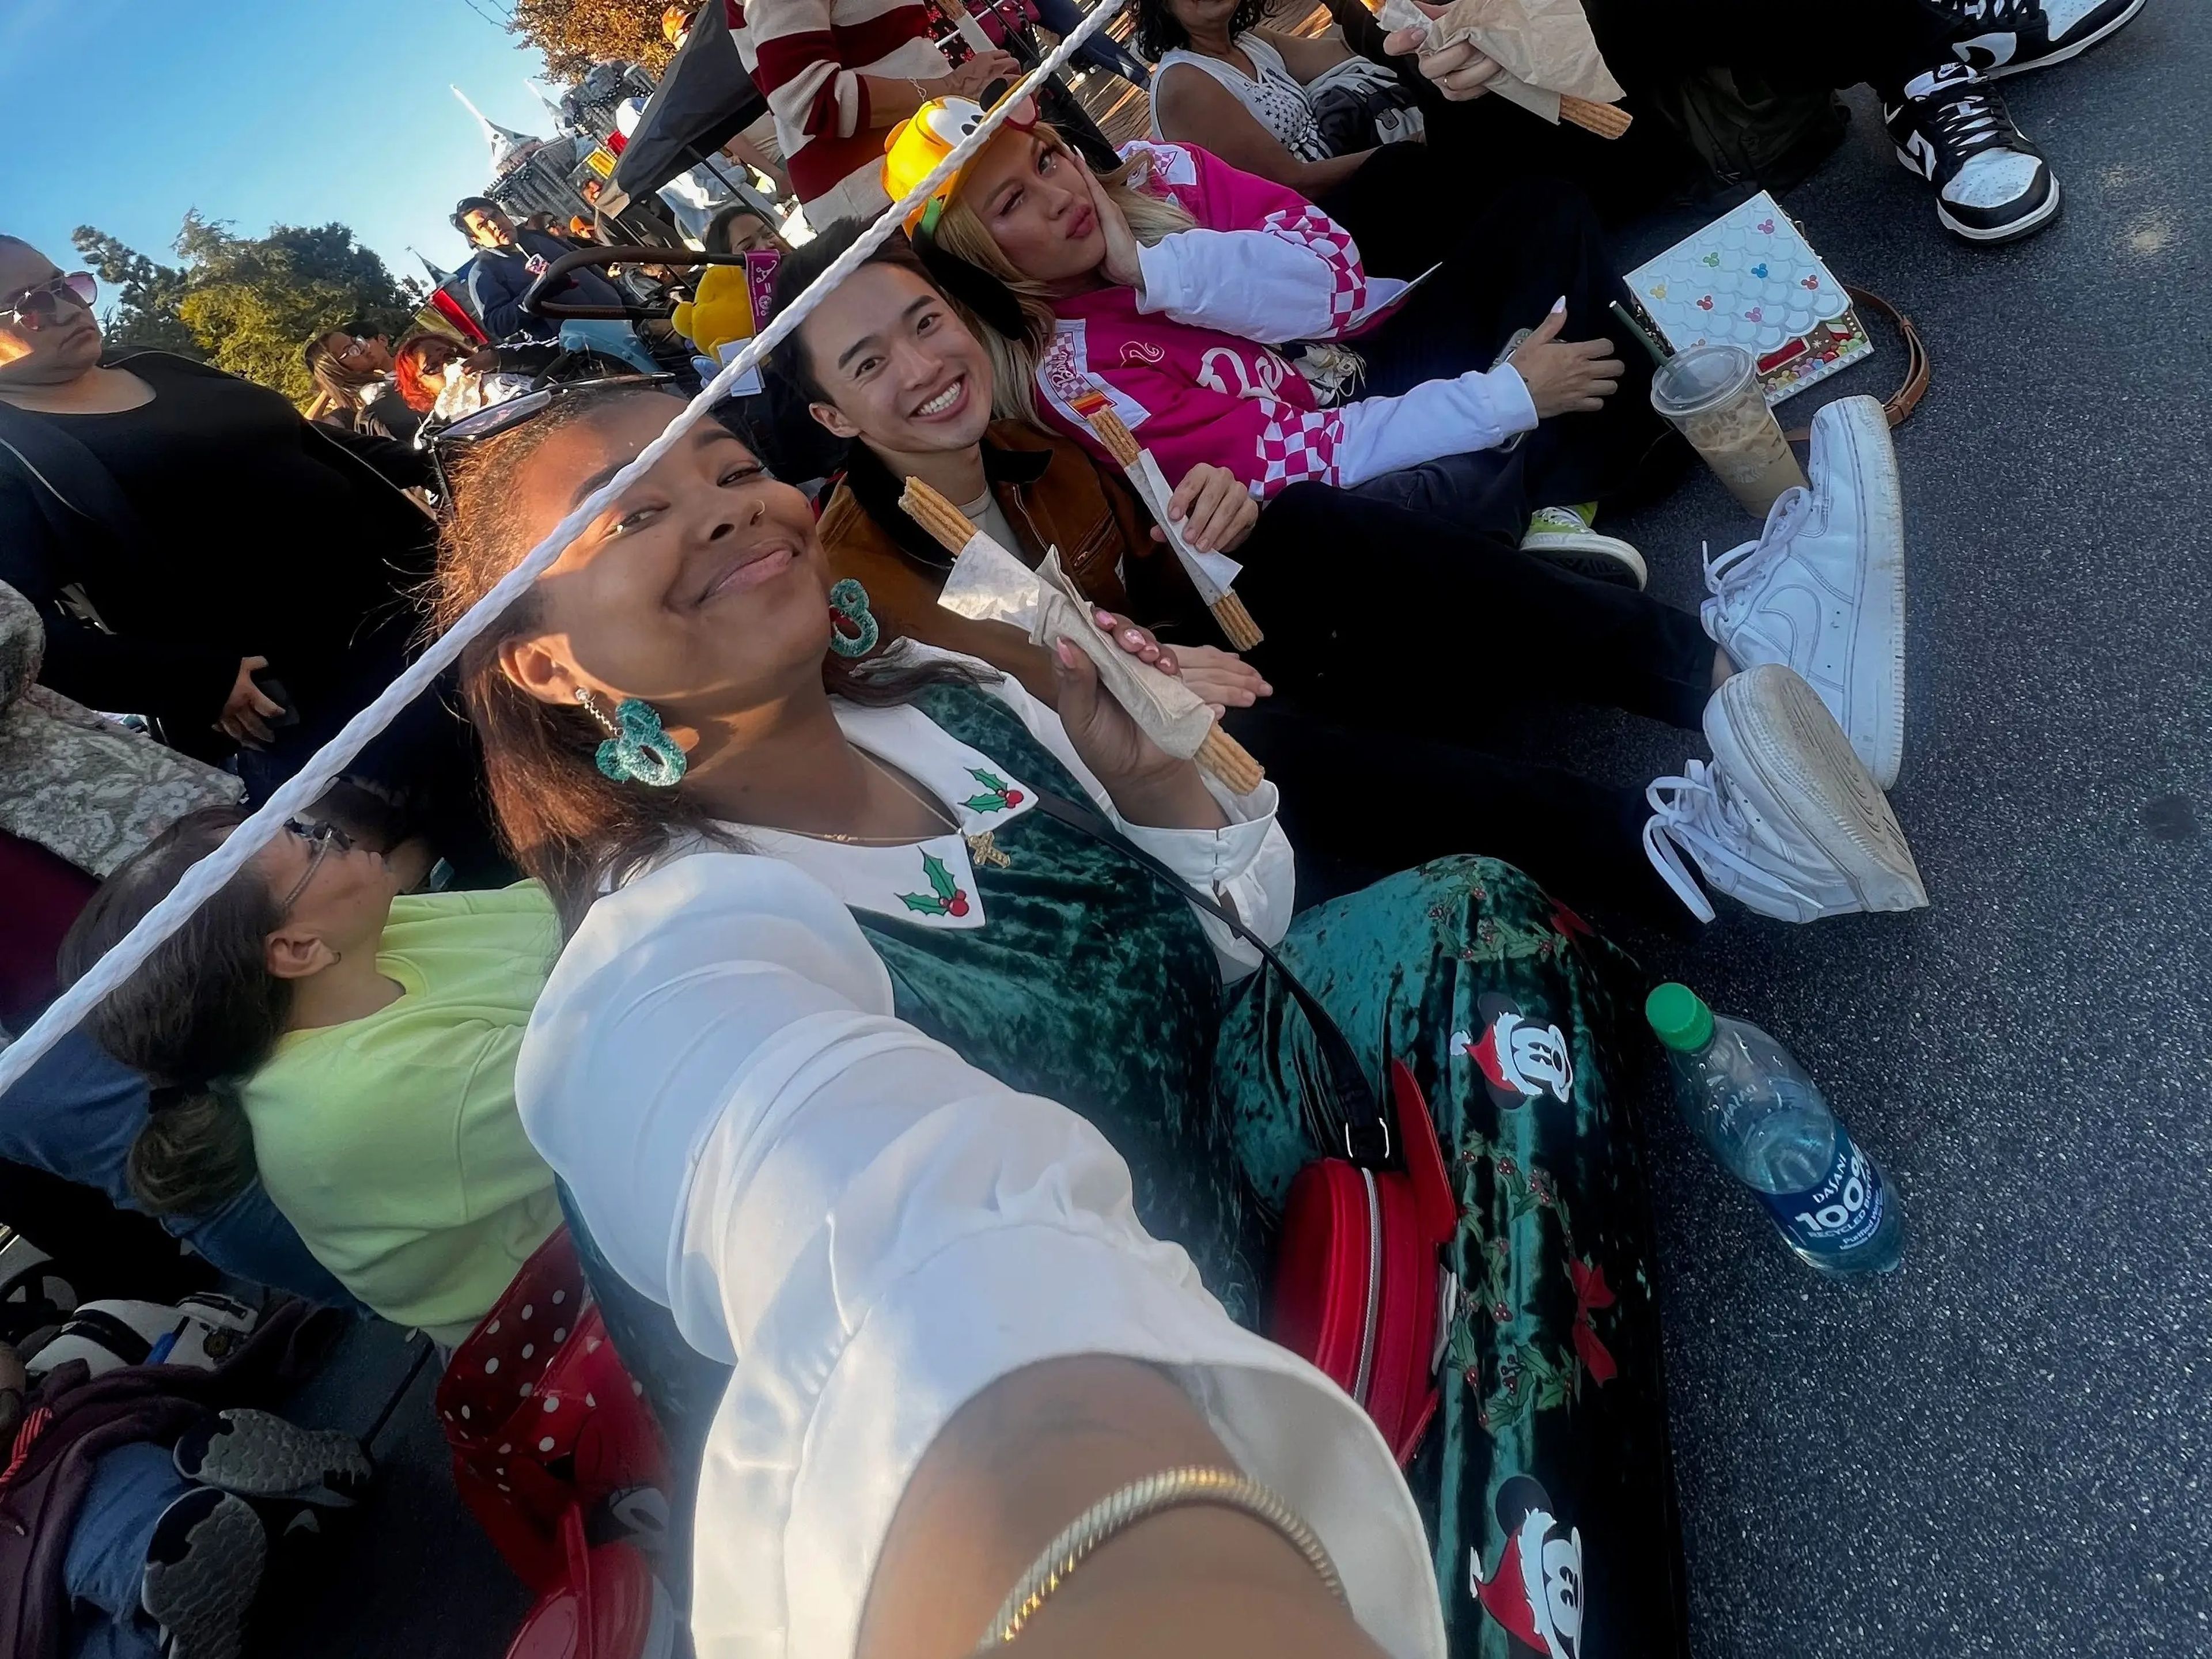 Selfie of the writer wearing a green dress with holly details and two friends, wearing a brown jacket and a pink outfit, sitting on the ground at Disneyland